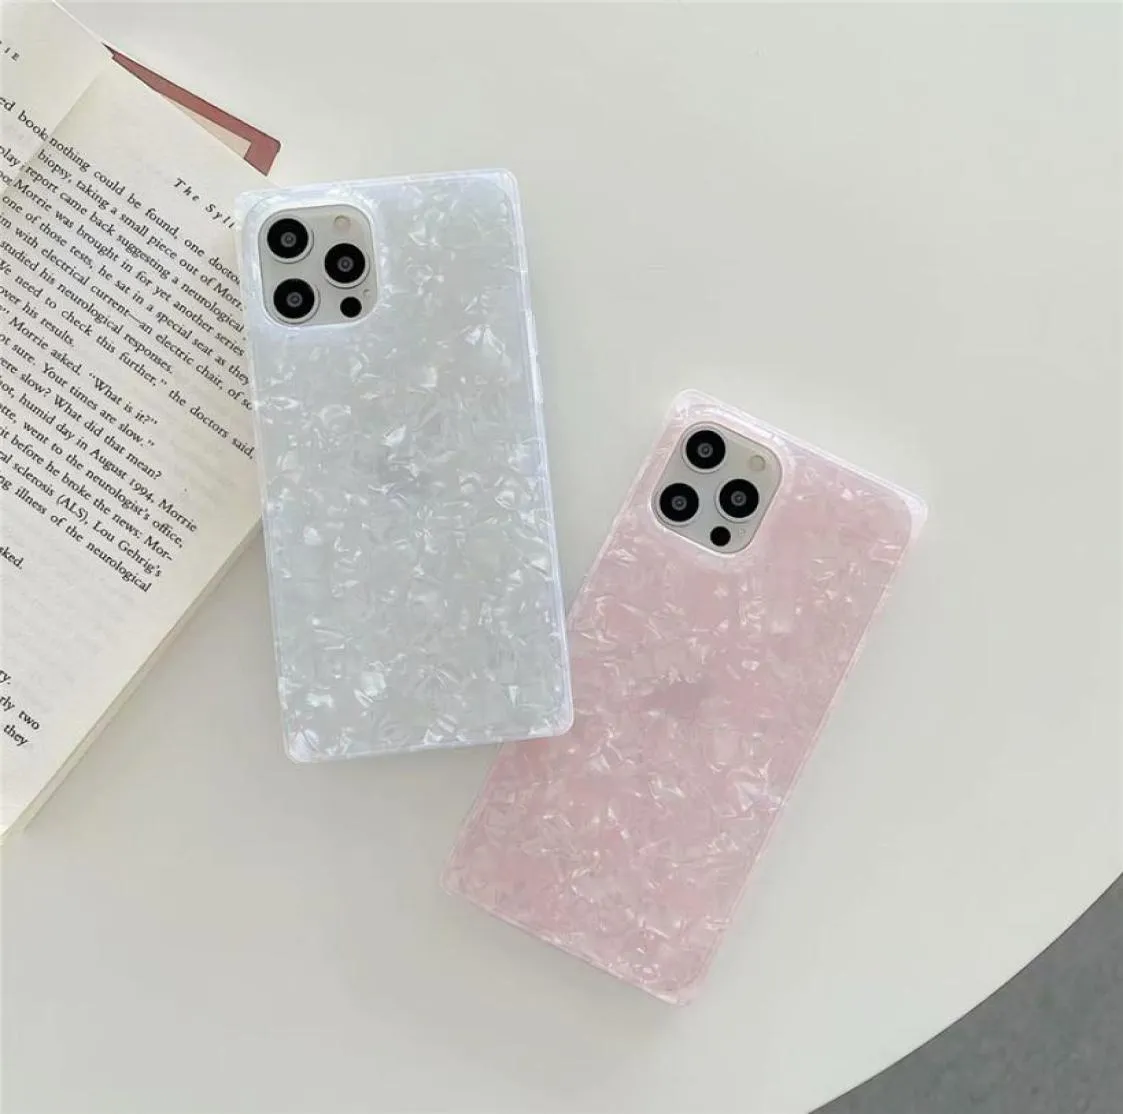 Square marble Phone Cases For iPhone 13 12 Mini 11 Pro X XS Max XR 8 7Plus Bling Kickstand Crystal Cover Back70889826570736